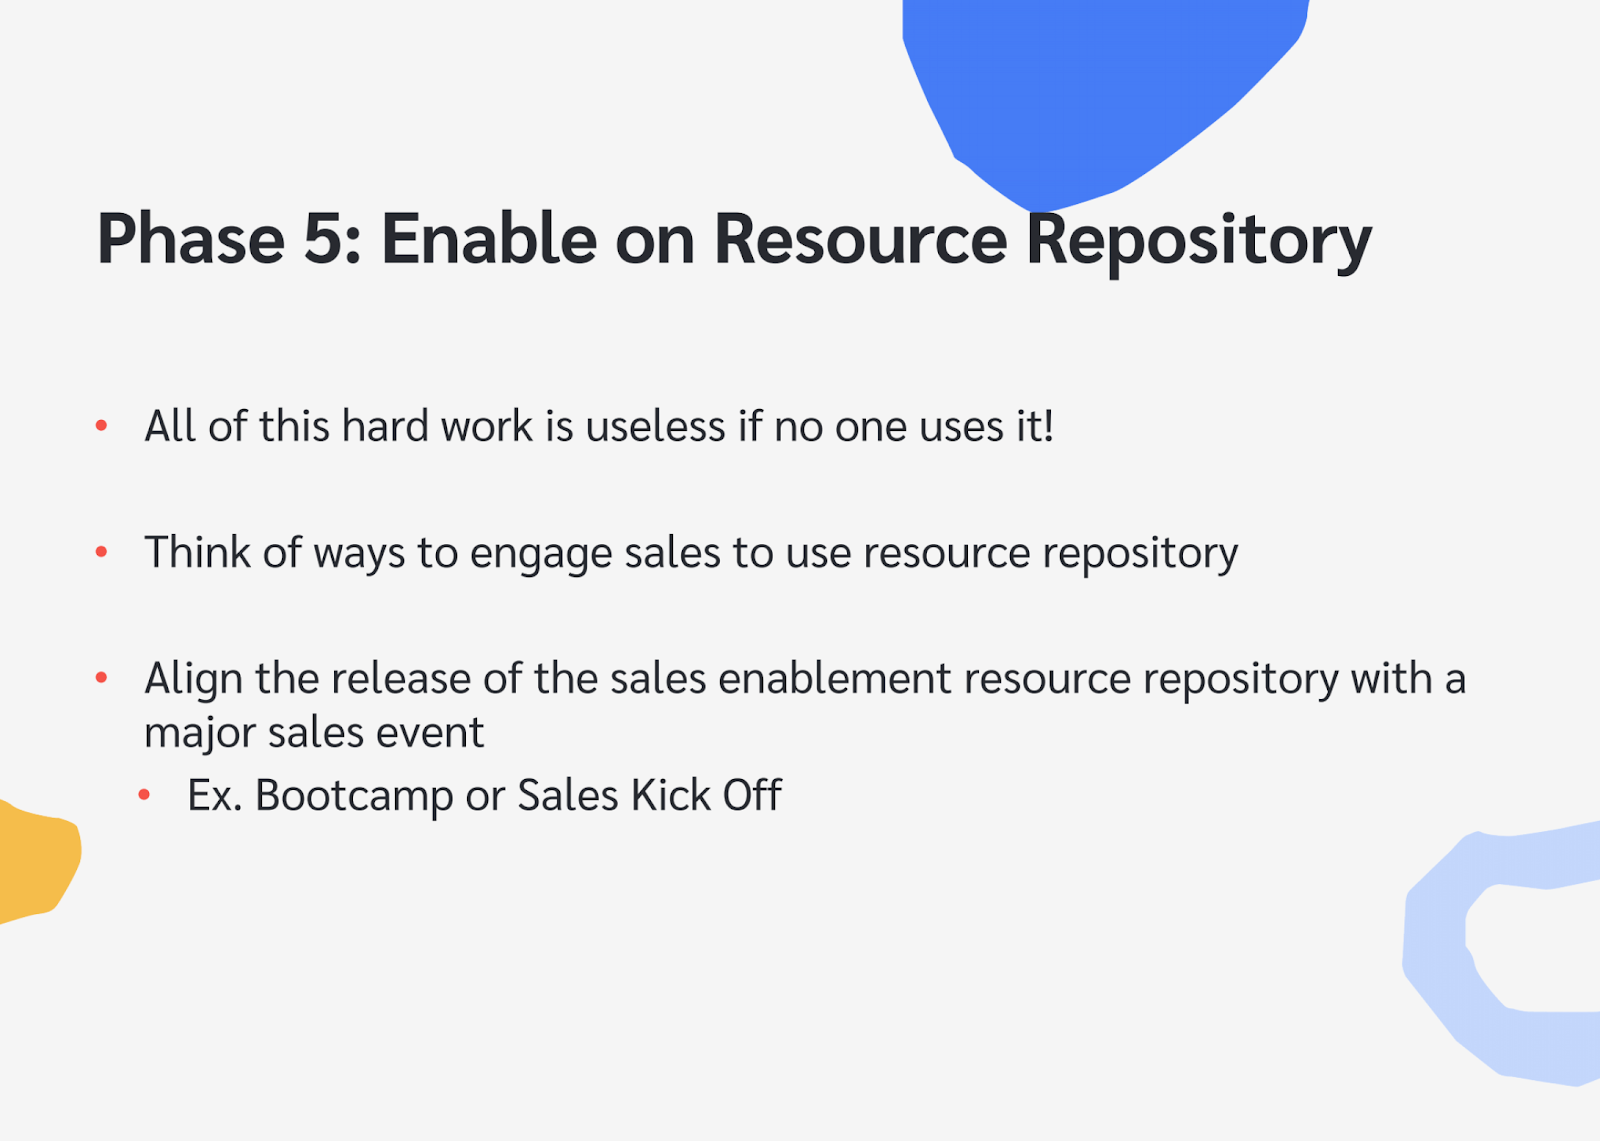 Be sure to engage teams and inform them exactly where they can locate sales enablement resources.